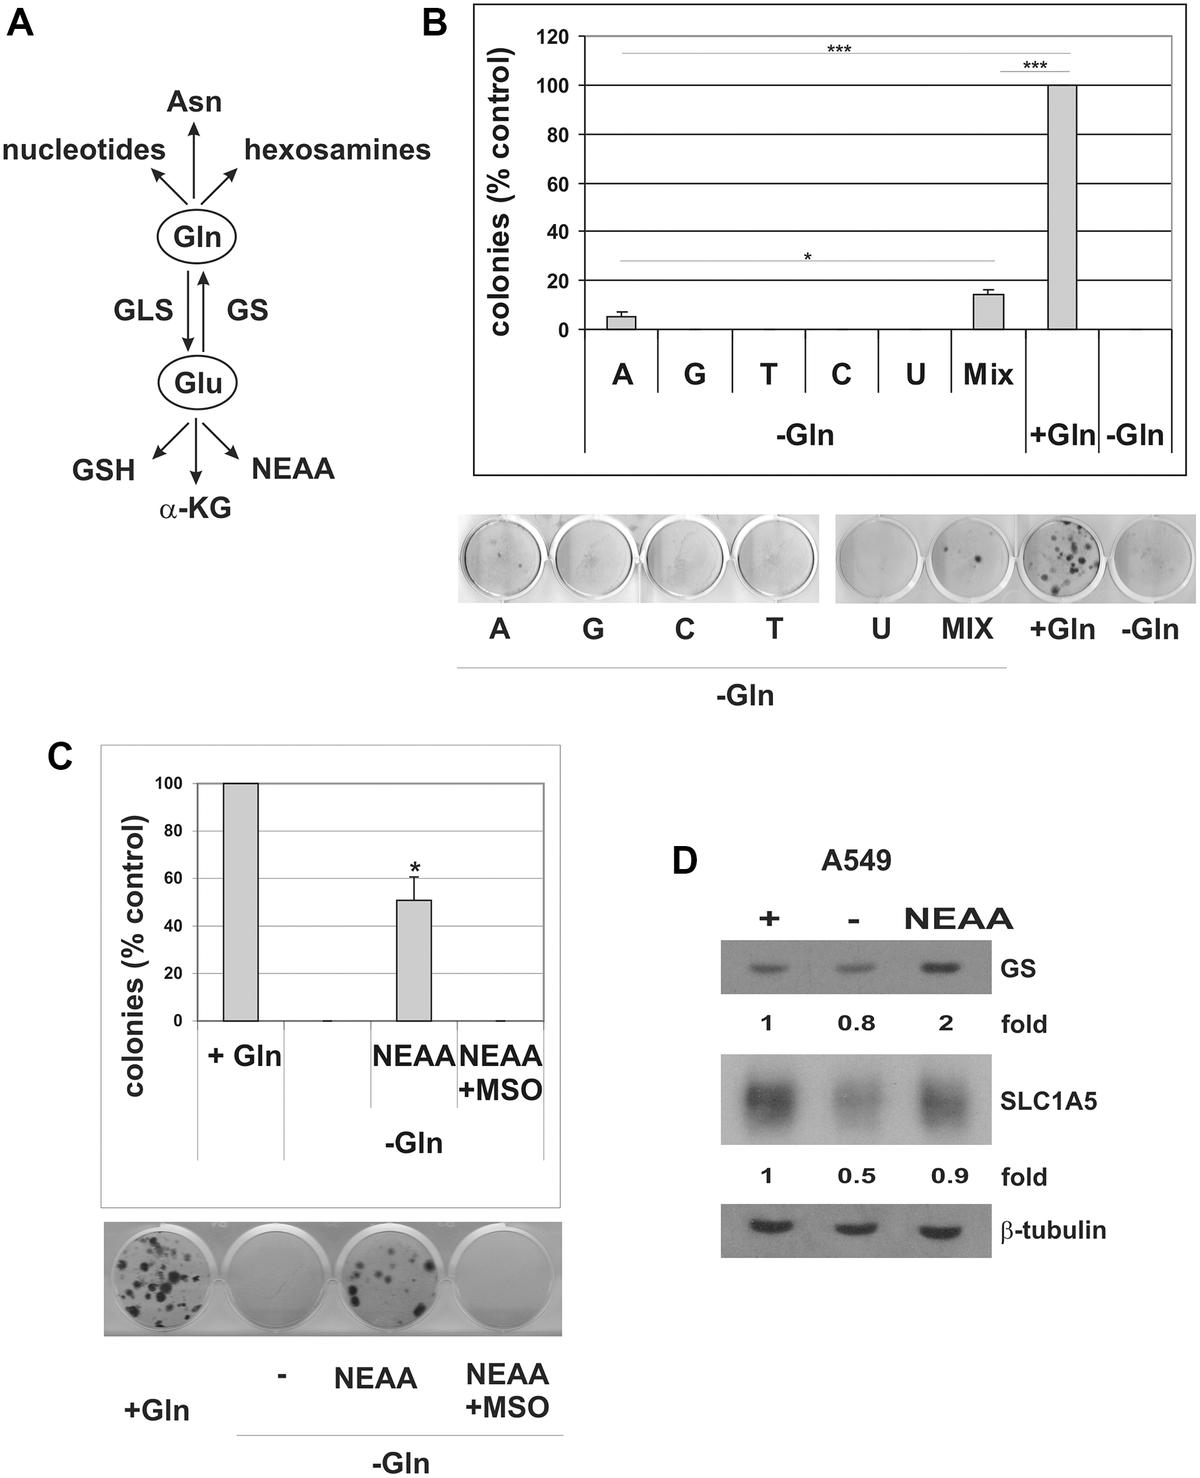 Nucleosides and NEAA restore escape from TIS in Gln-deprived conditions. (A) Schematic overview of glutamine usage in cancer cells. Gln glutamine, Glu glutamate, Asn asparagine, GSH glutathione, α-KG alpha-ketoglutaric acid, NEAA non-essential amino acids, GLS glutaminase, GS Glutamine synthetase. (B) Doxorubicin-induced senescent A549 cells were grown with (+Gln) or without (−Gln) glutamine in medium containing 0.1 mM each adenosine, guanosine, cytidine, thymidine, uridine, or in combination (Mix, 0.1 mM each). Colonies that evaded the senescent growth arrest were stained and counted. The data shown here represent three experiments exhibiting similar effects. A representative image of the colony escape assay is shown. (C) Doxorubicin-induced senescent A549 cells were grown with (+Gln), or without (−Gln) glutamine plus NEAA, in the presence or in the absence of 2 mM MSO. Colonies that evaded the senescent growth arrest were stained and counted. The data shown here represent three experiments exhibiting similar effects. A representative image of the colony escape assay is shown. (D) Expression of GS and SLC1A5 proteins was analyzed in parental A549 cells, grown with (+) or without (−) glutamine or without glutamine plus NEAA (NEAA) for 72 hours. Filters were stripped and reprobed with anti-β-tubulin antibodies as a loading control. GS and SLC1A5 levels, normalized to the relative β-tubulin levels, are reported as fold change of Gln-supplemented sample.